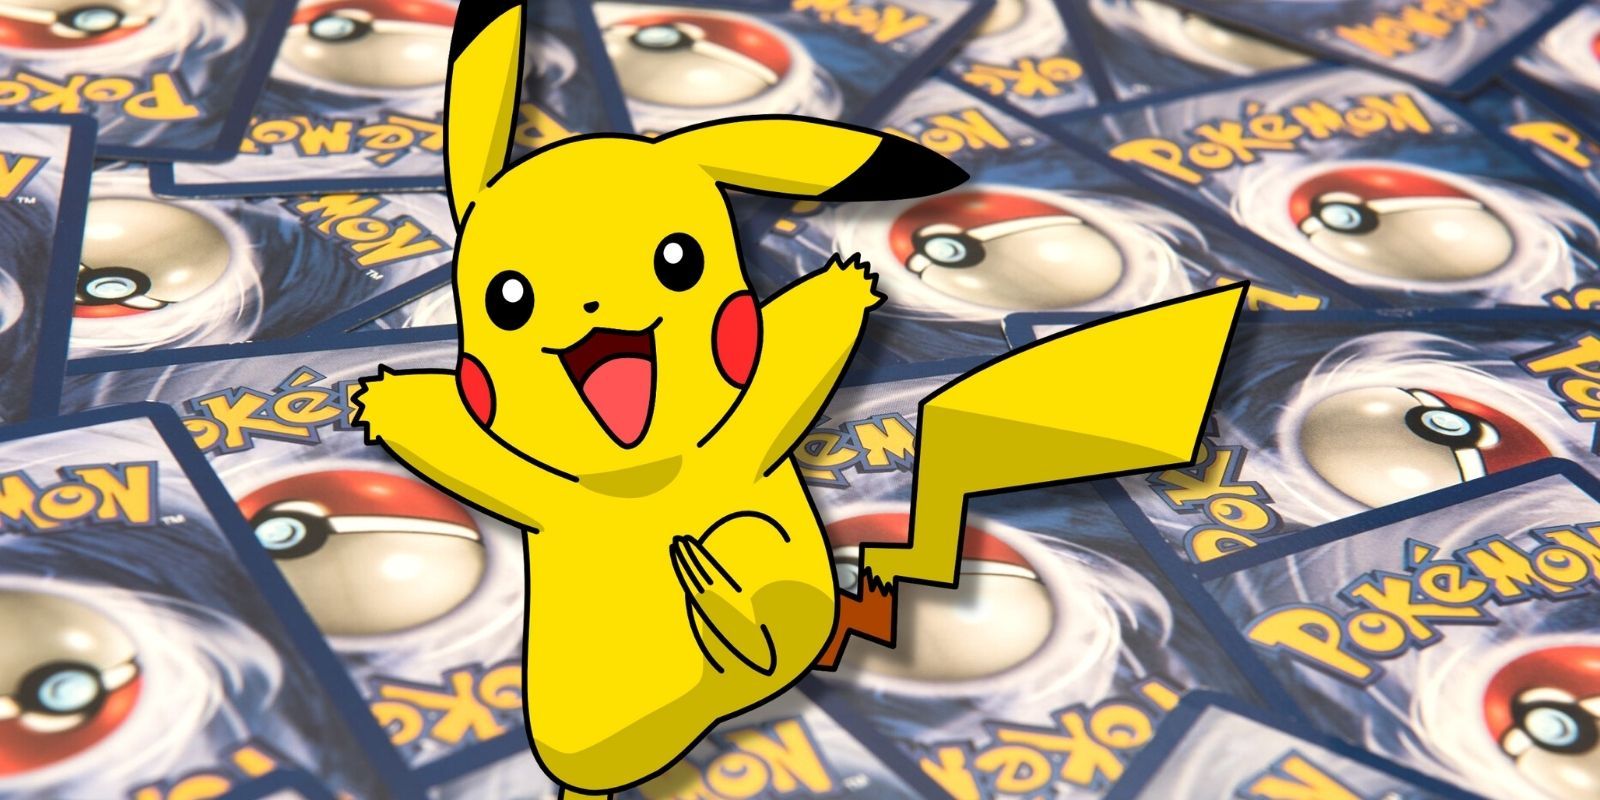 This Rare Illustrator Pikachu Pokemon Card Sold for Nearly $1 Million –  Robb Report